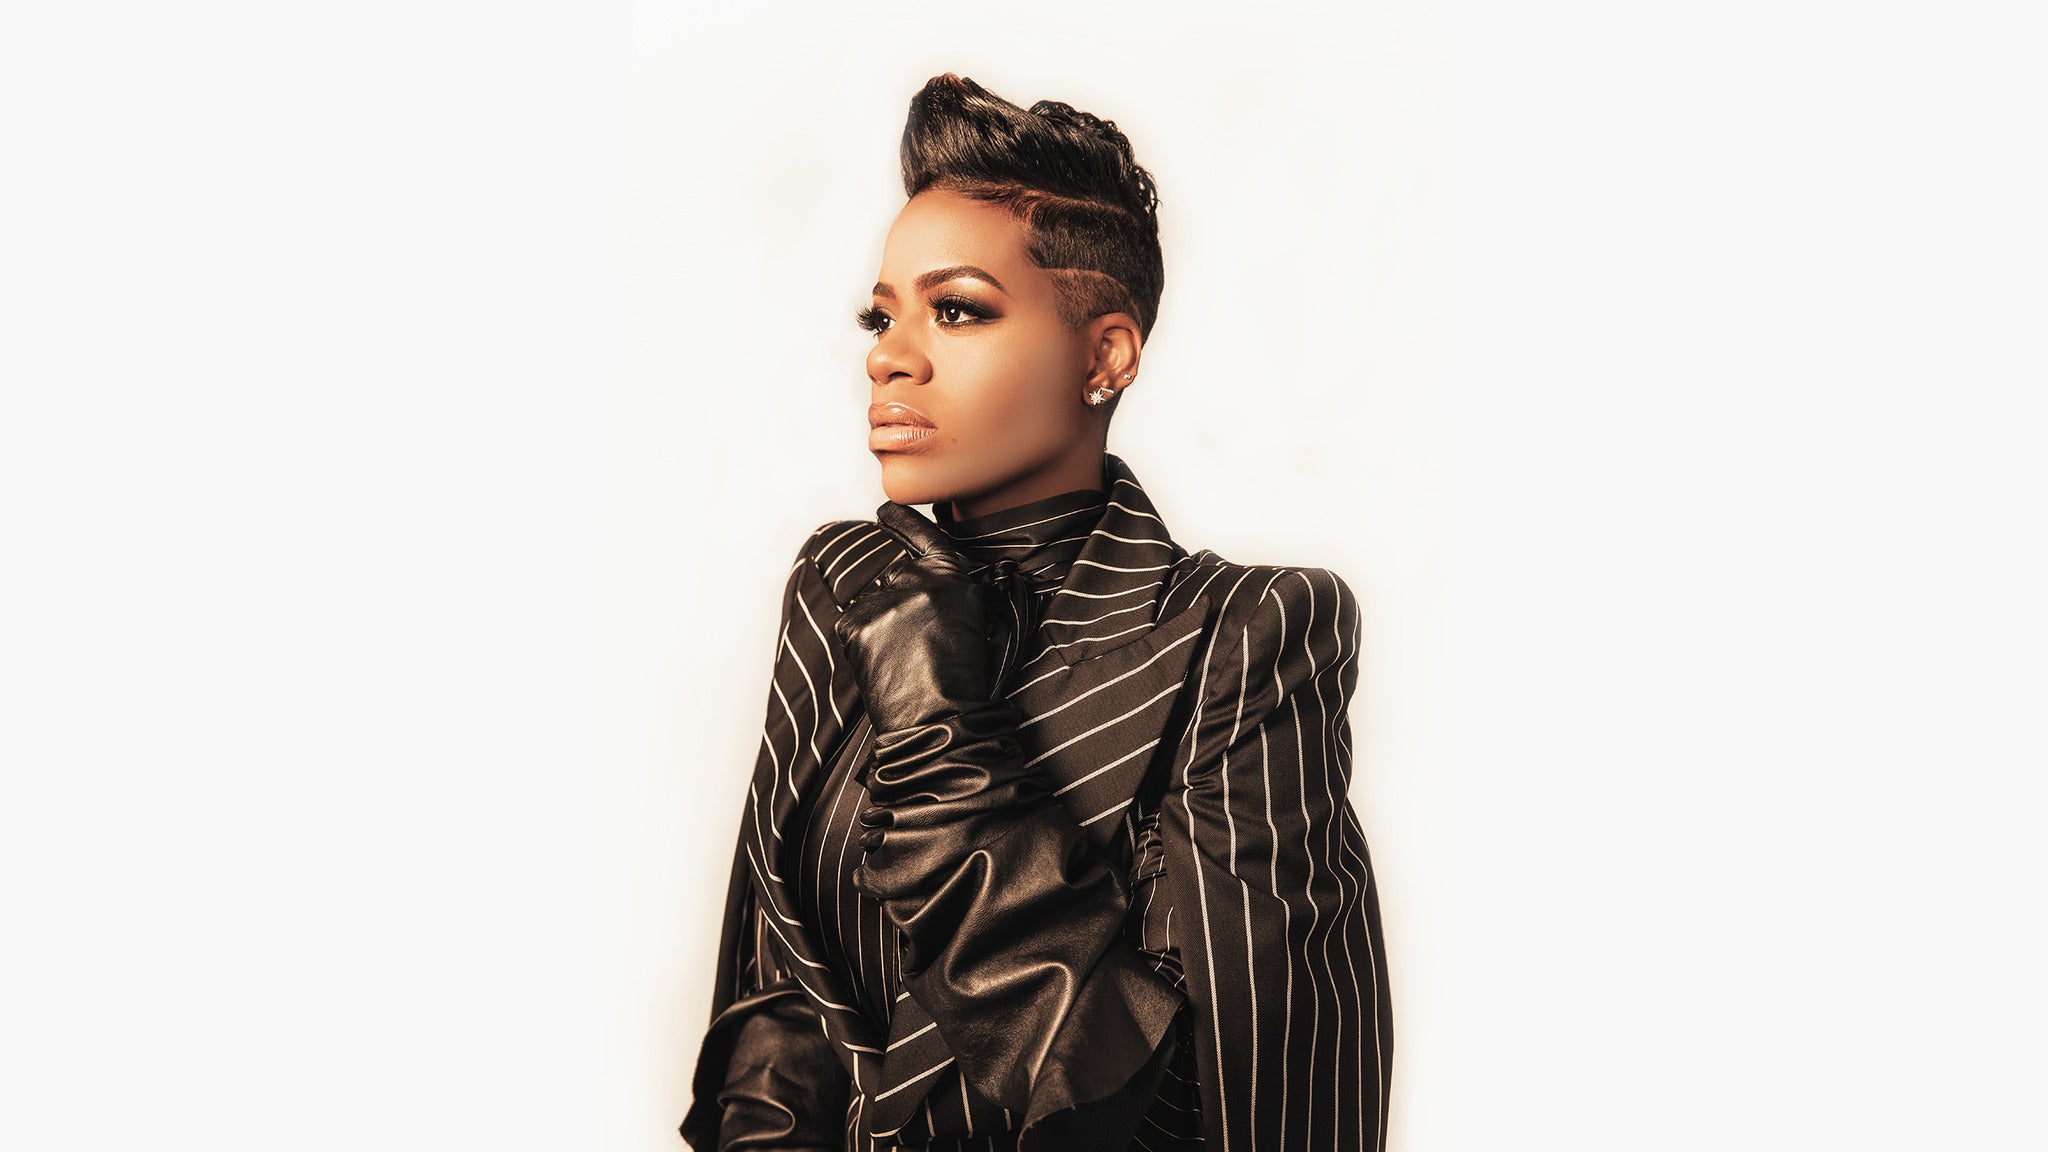 presale password for Fantasia tickets in Baltimore - MD (Chesapeake Employers Insurance Arena)